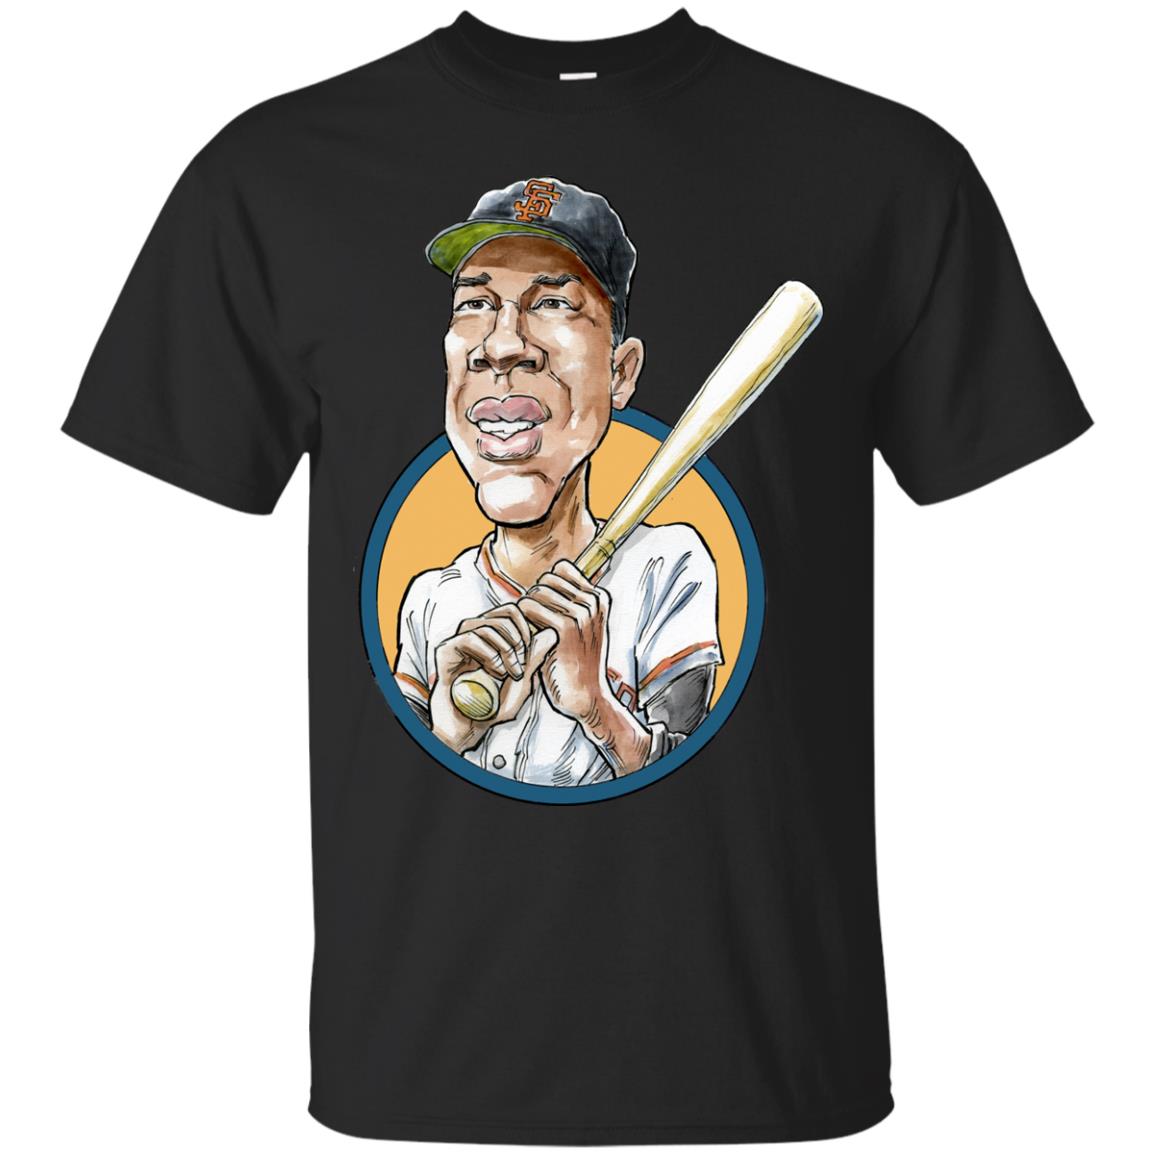 Willie Mays T Shirts - 10% Off - FavorMerch